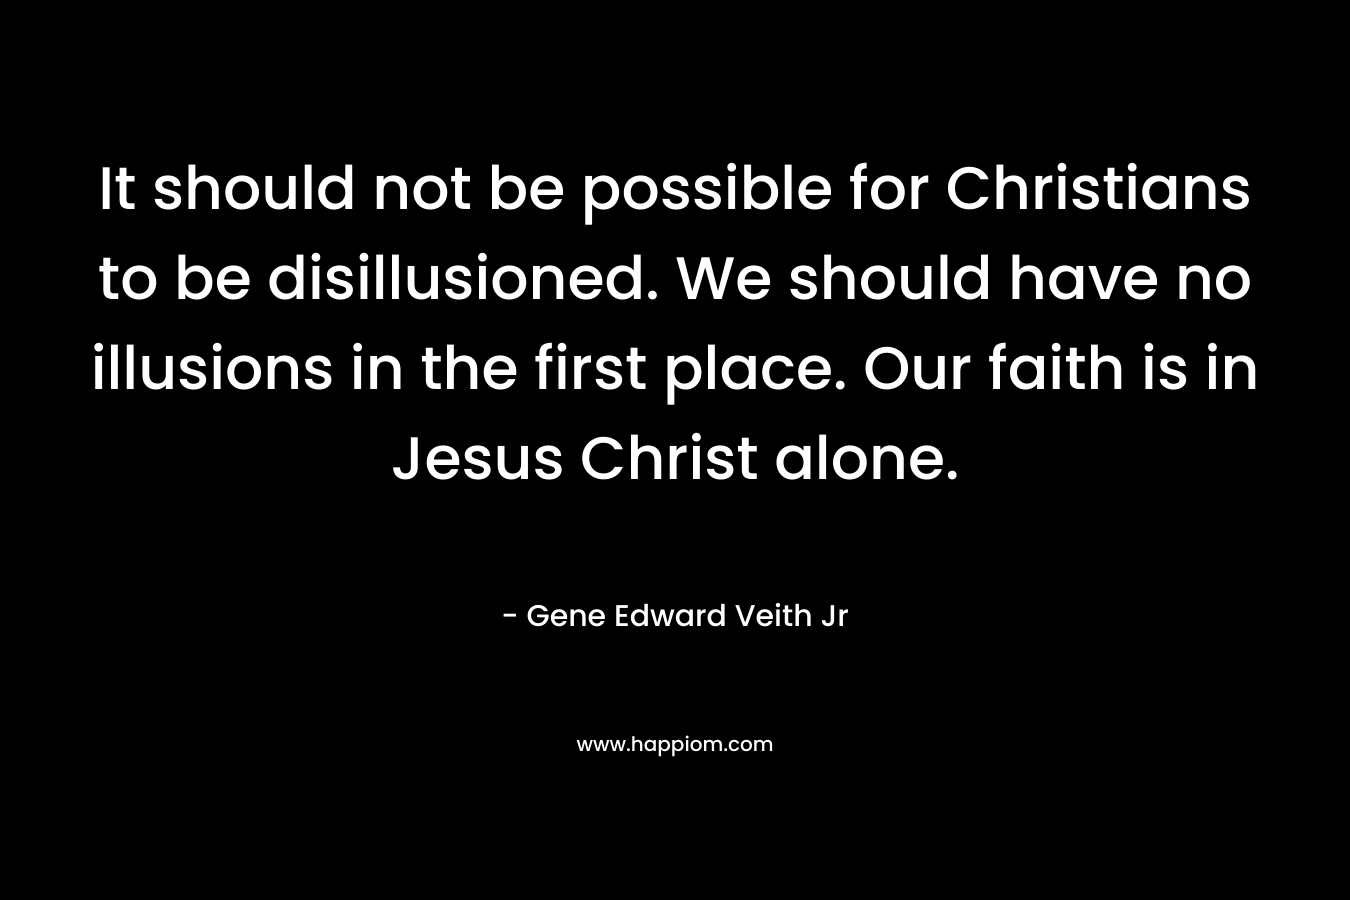 It should not be possible for Christians to be disillusioned. We should have no illusions in the first place. Our faith is in Jesus Christ alone. – Gene Edward Veith Jr